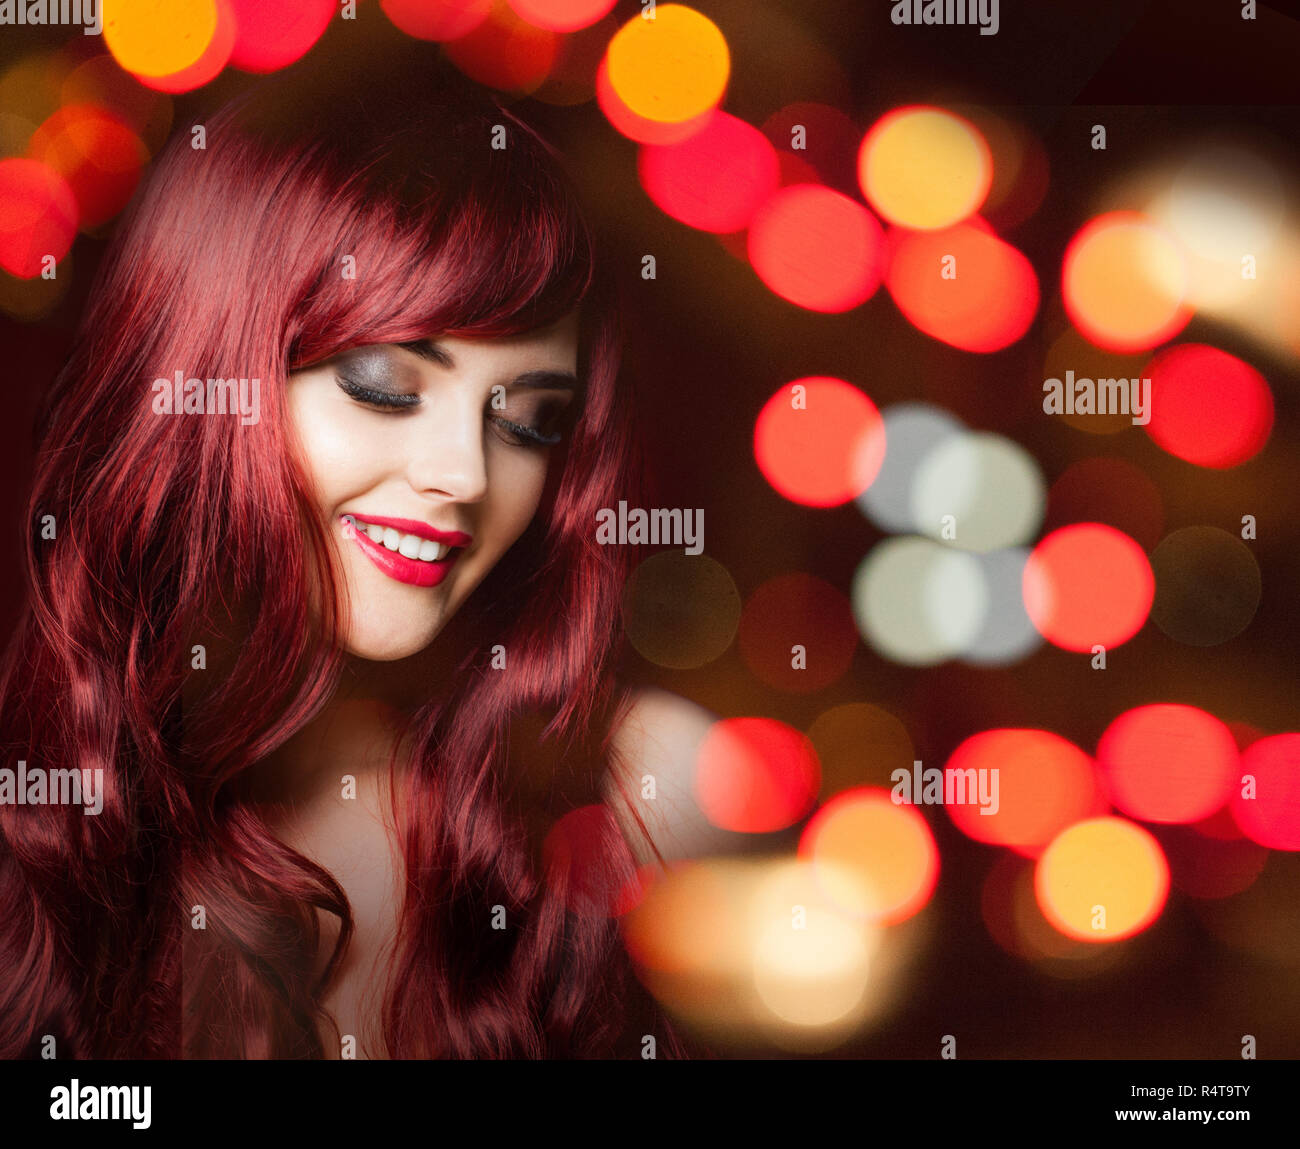 Cheerful redhead woman with long red curly hairstyle on bright color ...